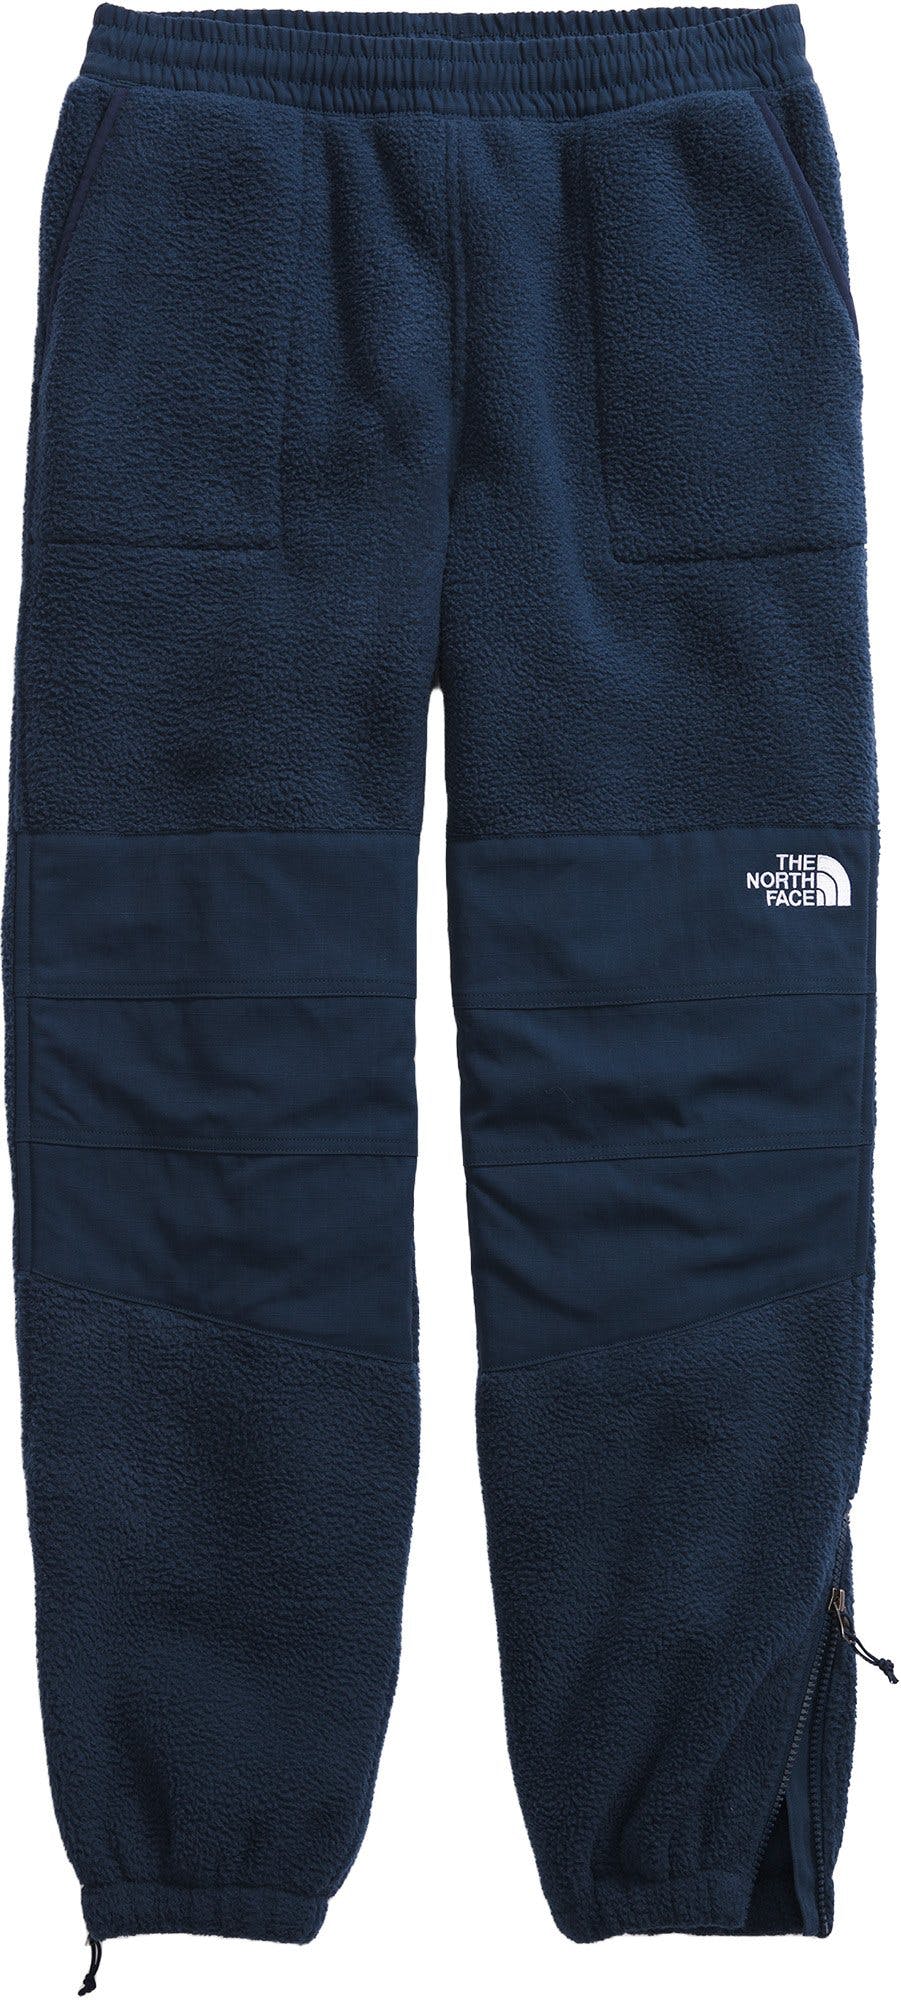 Product image for Ripstop Denali Pant - Women’s